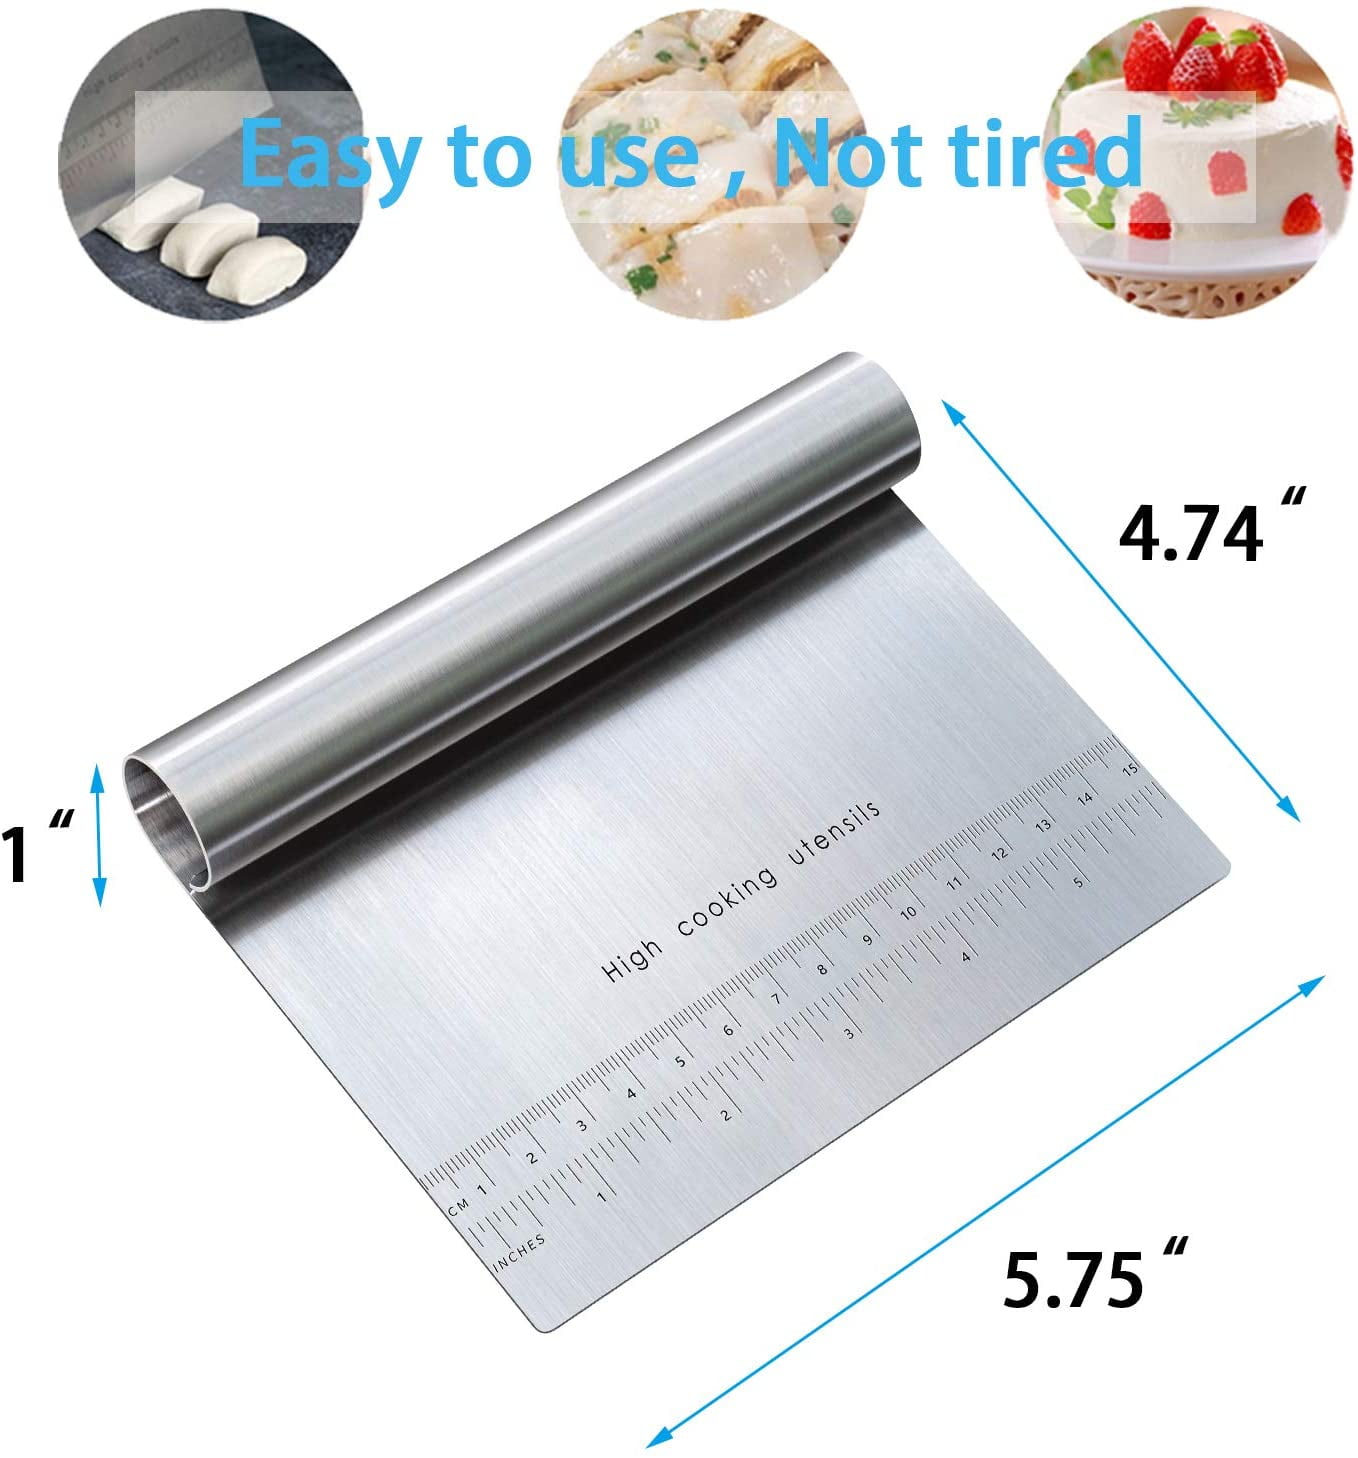 Last Confection Stainless Steel Bench Scraper/Pastry Dough Cutter Chopper  for Bread, Pizza, Pasta and Cookies